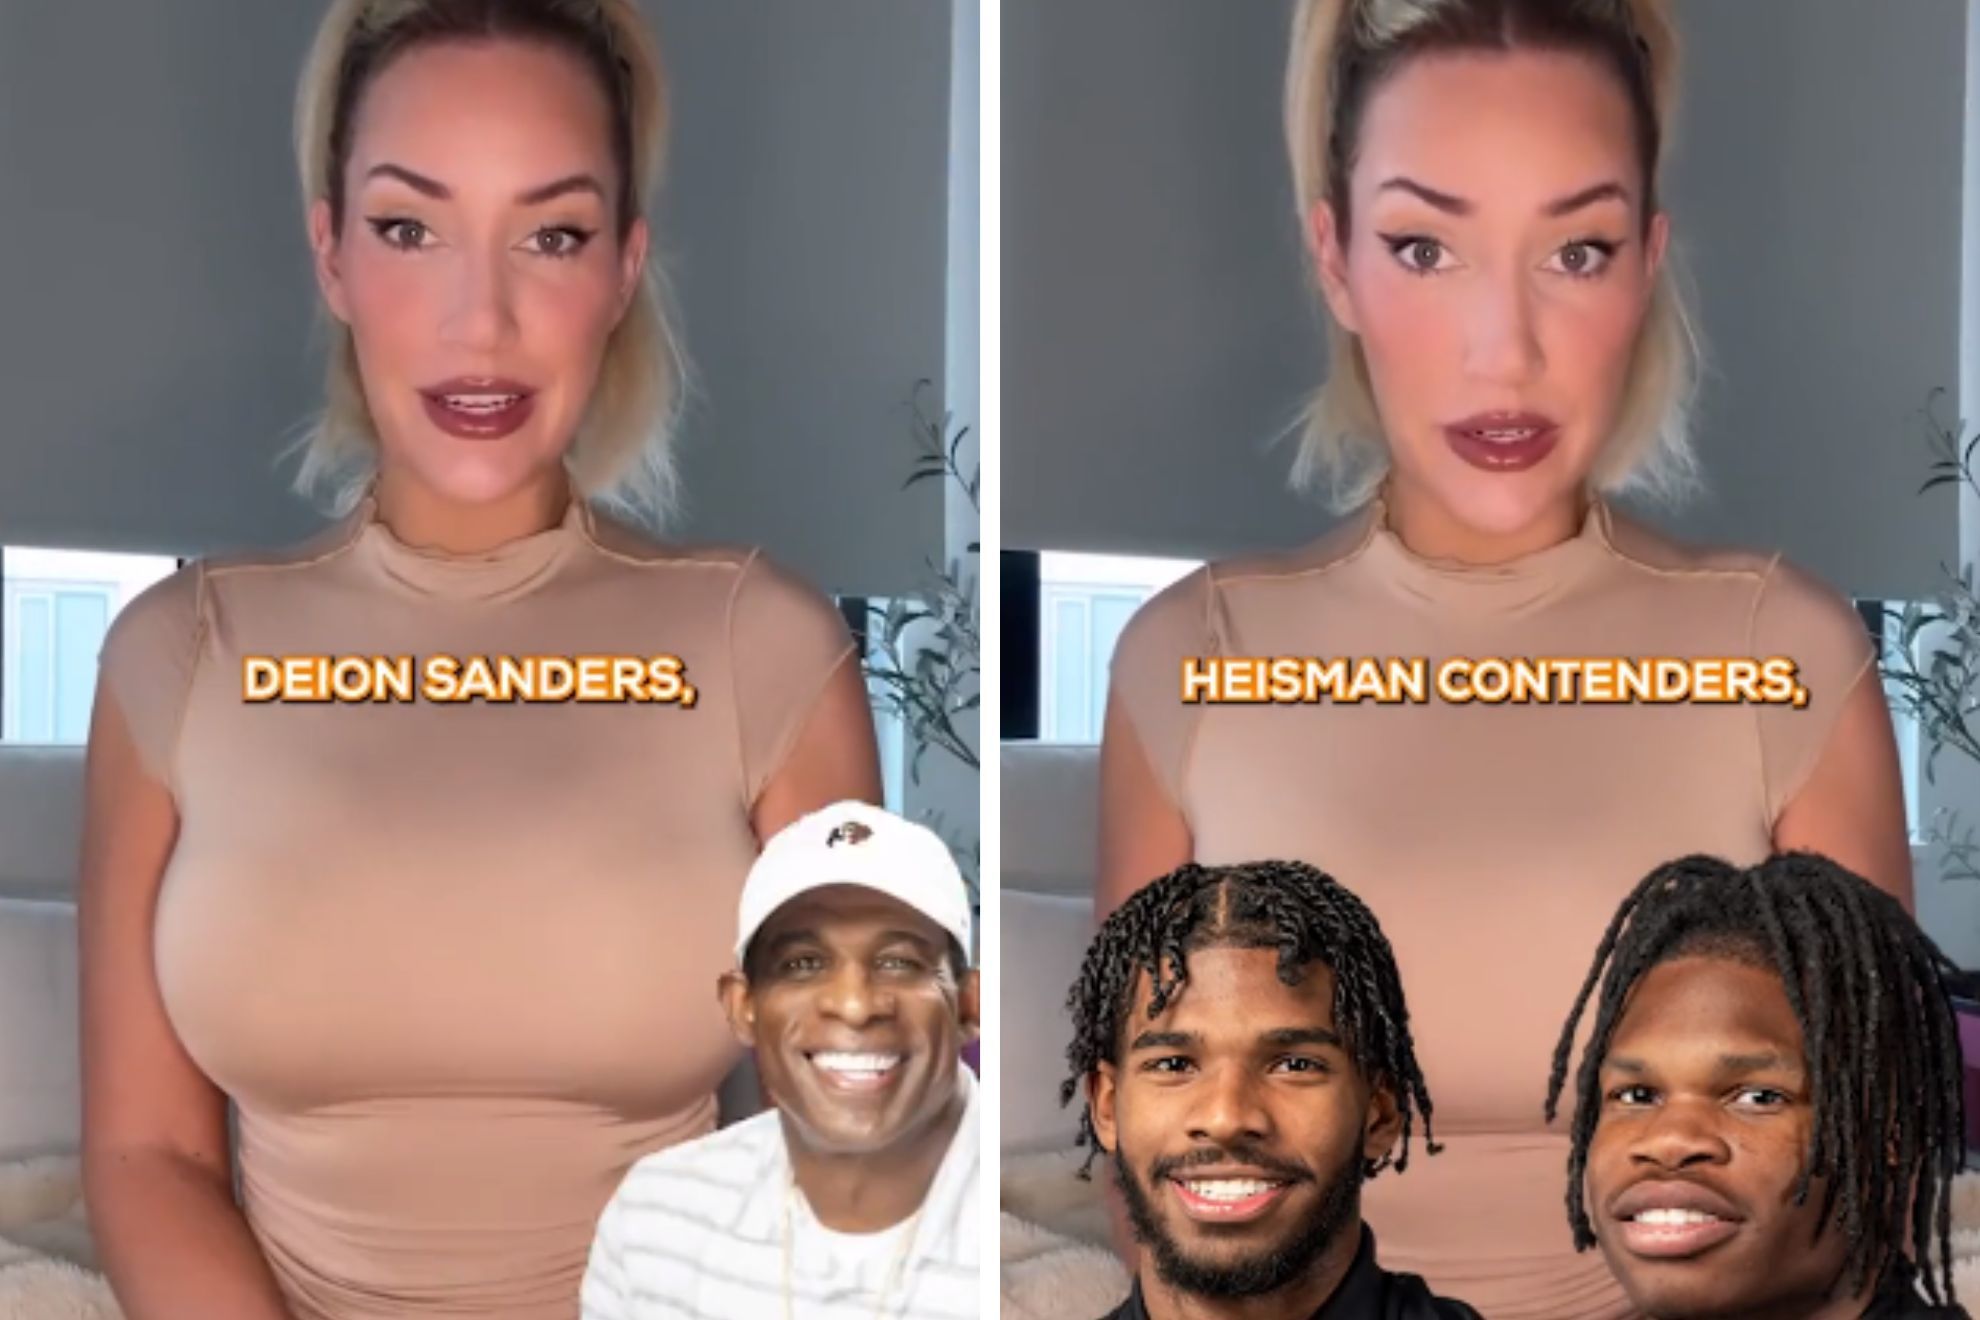 Paige Spiranac chimes in on 'divise' Deion Sanders, coach of her hometown university